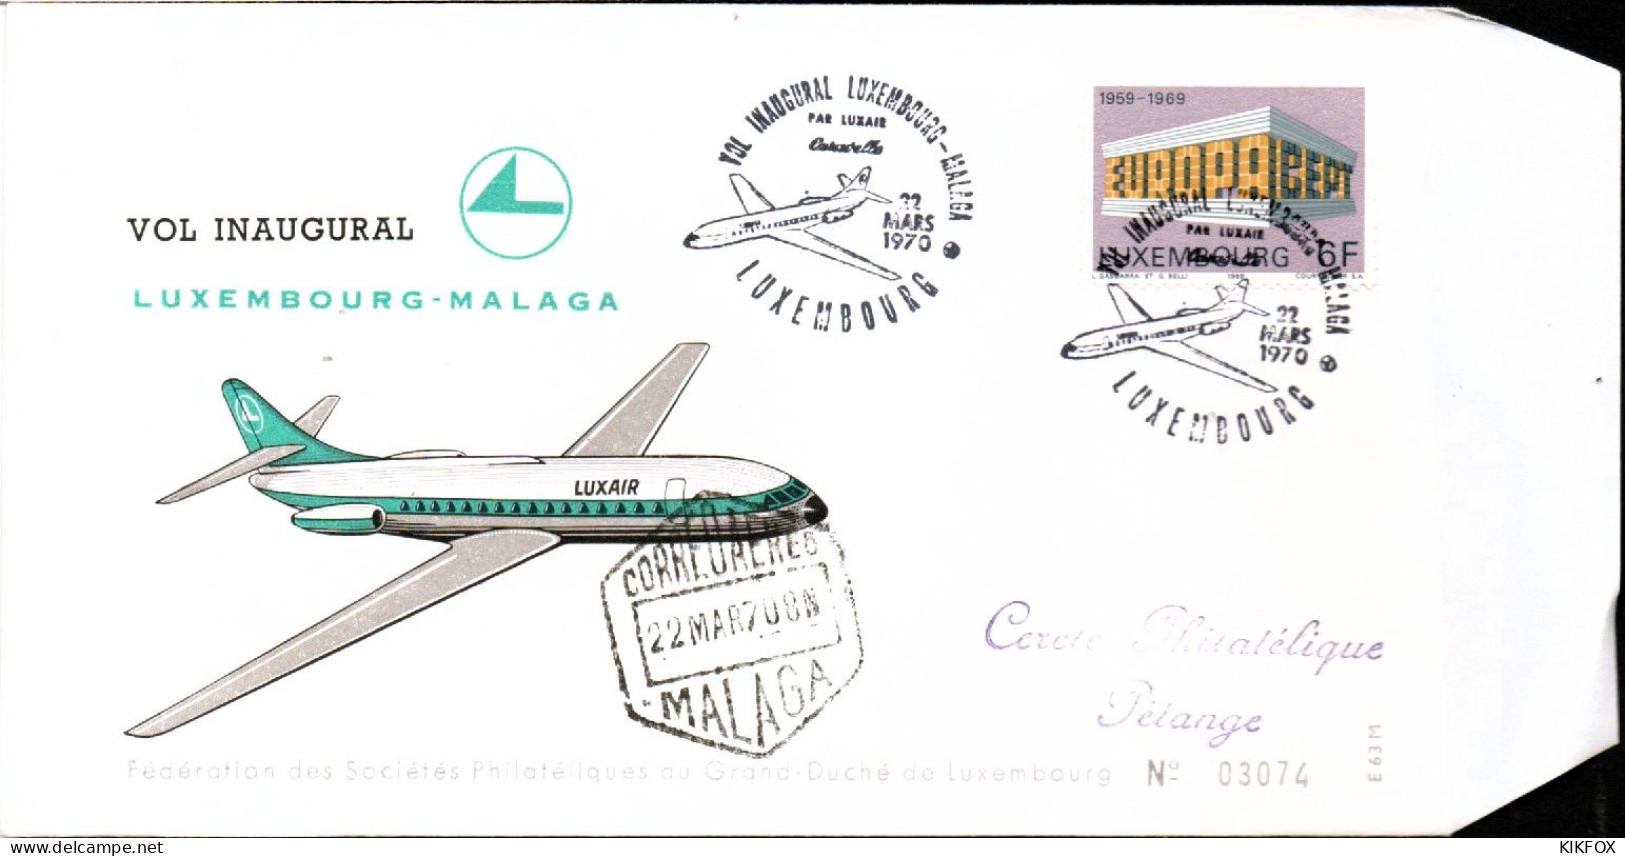 Luxembourg , Luxemburg ,22 Mars  1970 ,FDC  Vol Inaugural Luxembourg - Malaga , Timbre Mi 789, GESTEMPELT - Covers & Documents